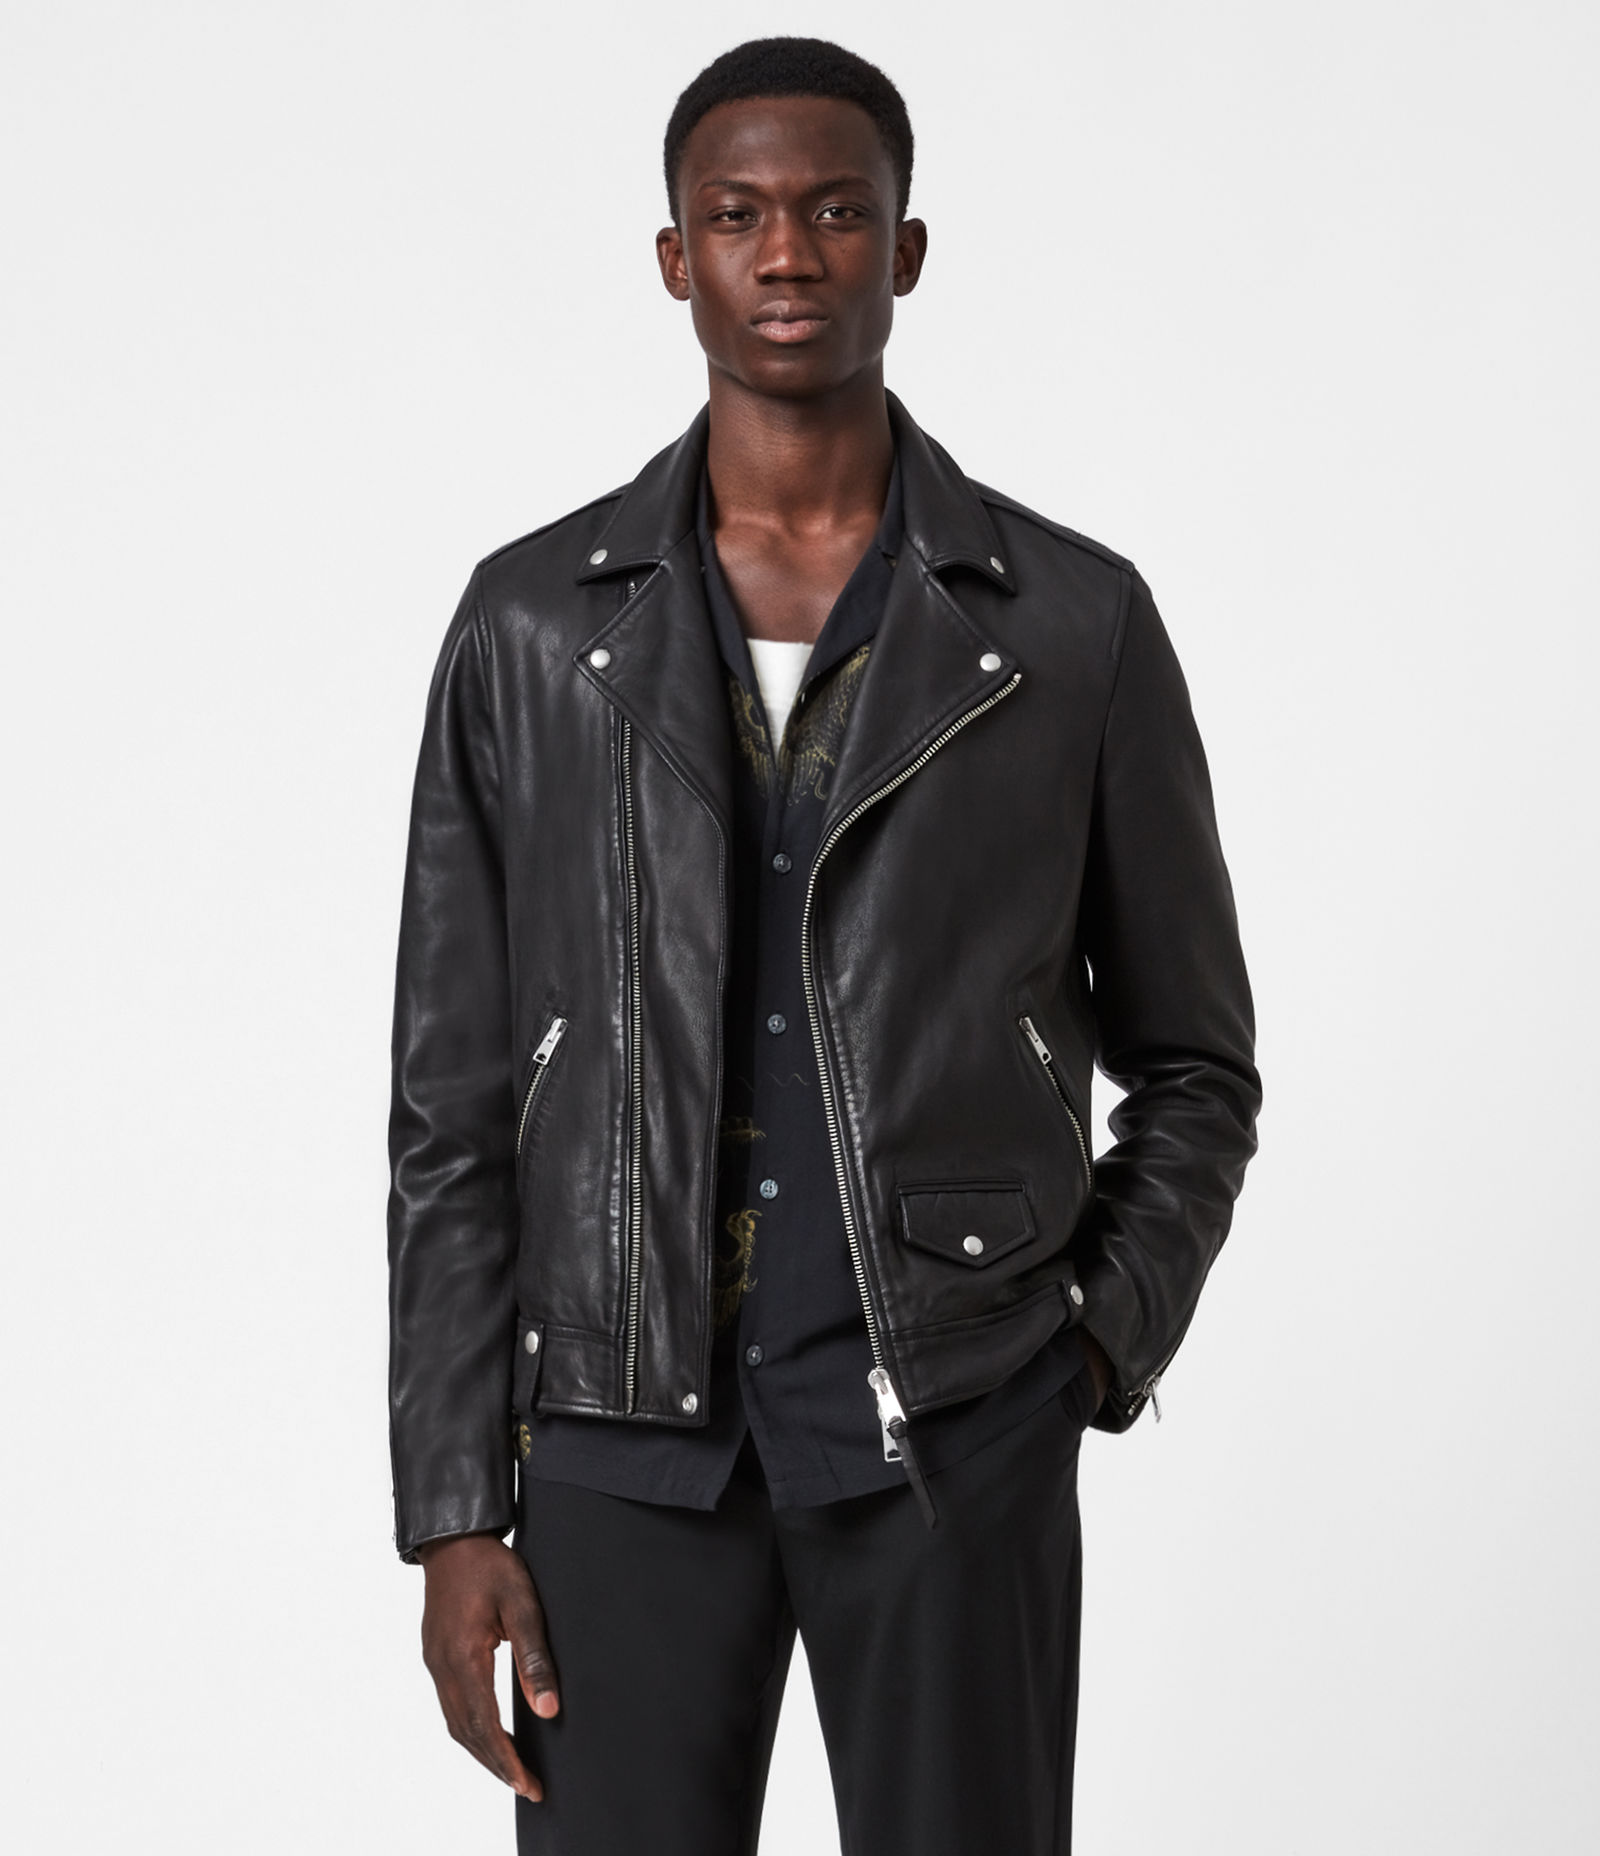 What To Know Before You Buy An Allsaints Leather Jacket – FORD LA